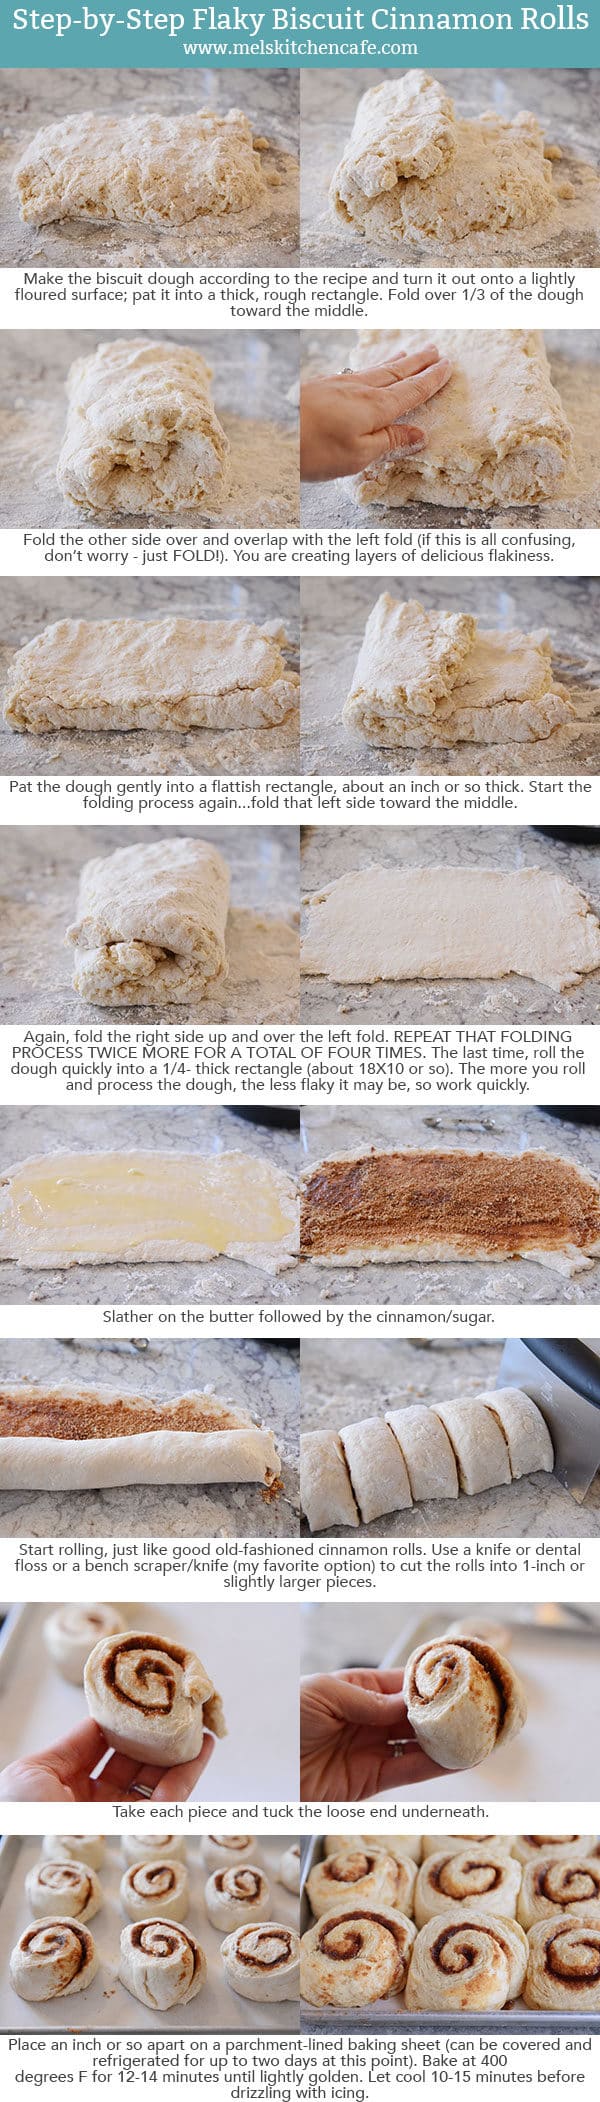 Step-by-step pictures and instructions of how to make biscuit cinnamon rolls.